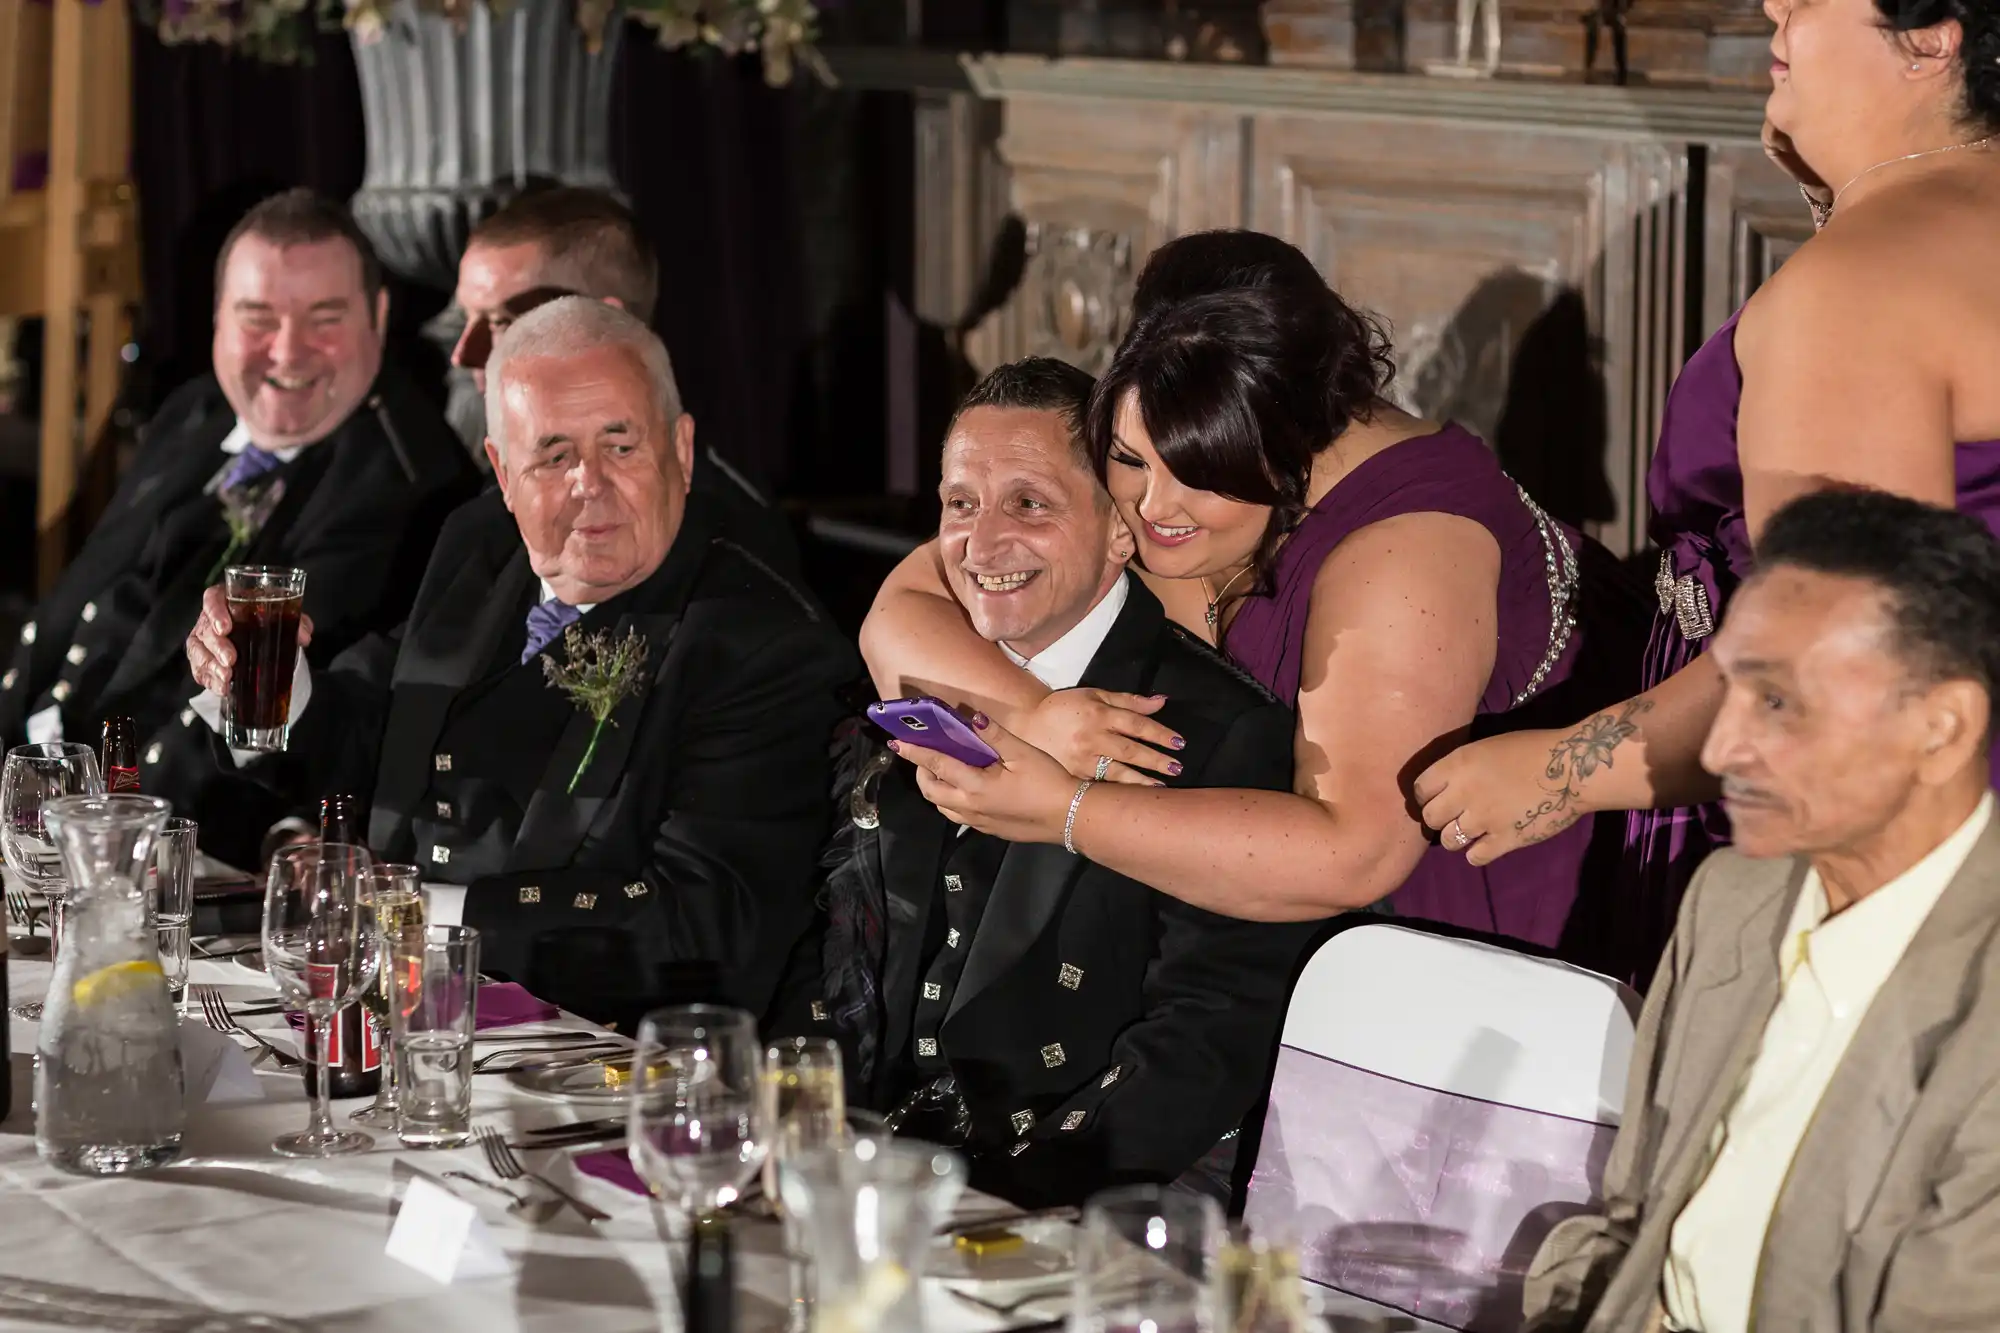 A group of guests at a formal event, one smiling woman showing something on a smartphone to a man next to her, other guests smiling and engaged in conversation.